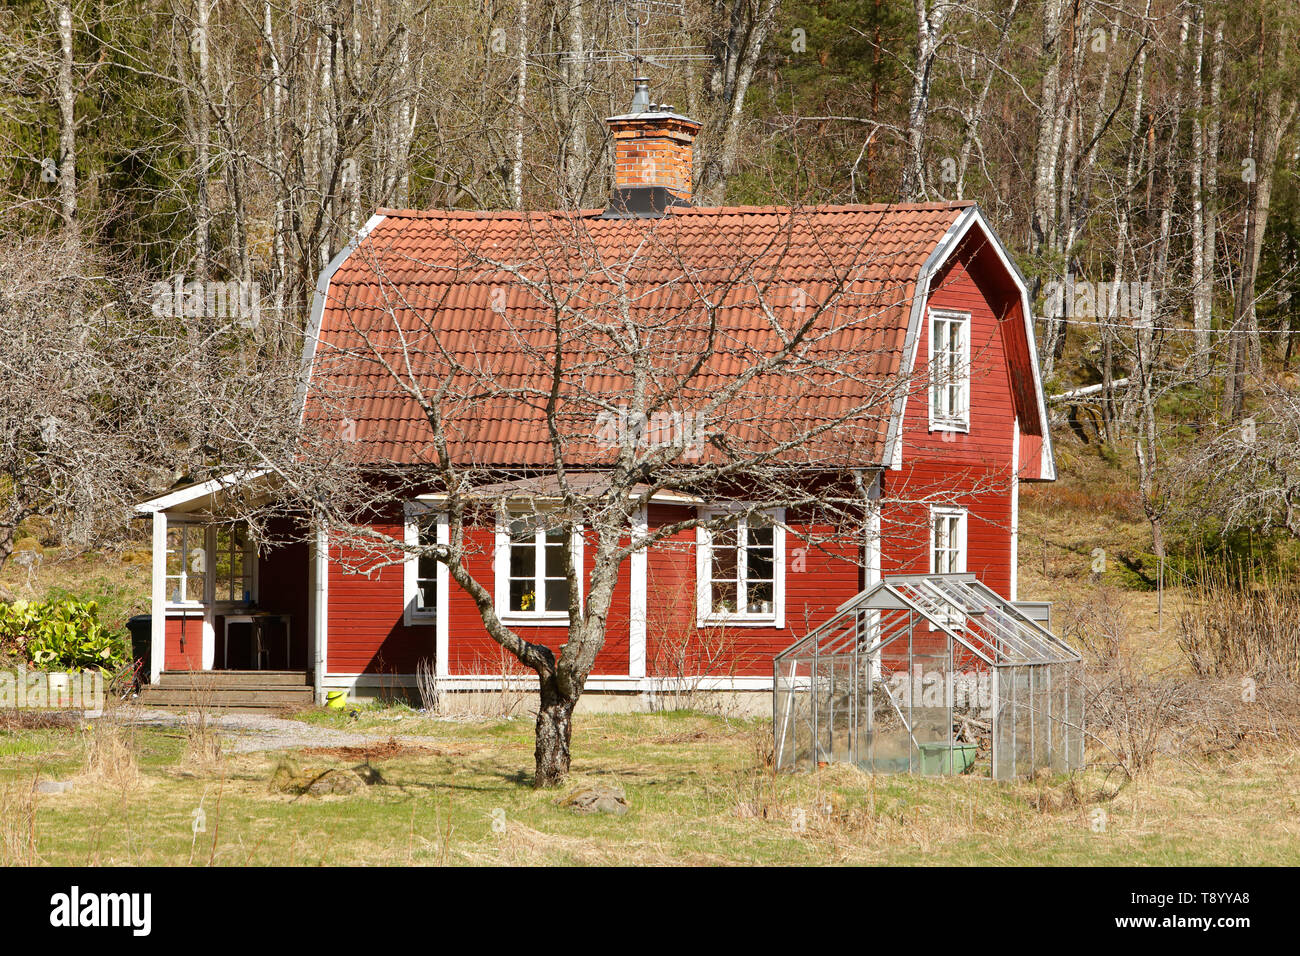 Typical Swedish countryside old wooden single-family red dwelling with a mansard roof. Stock Photo